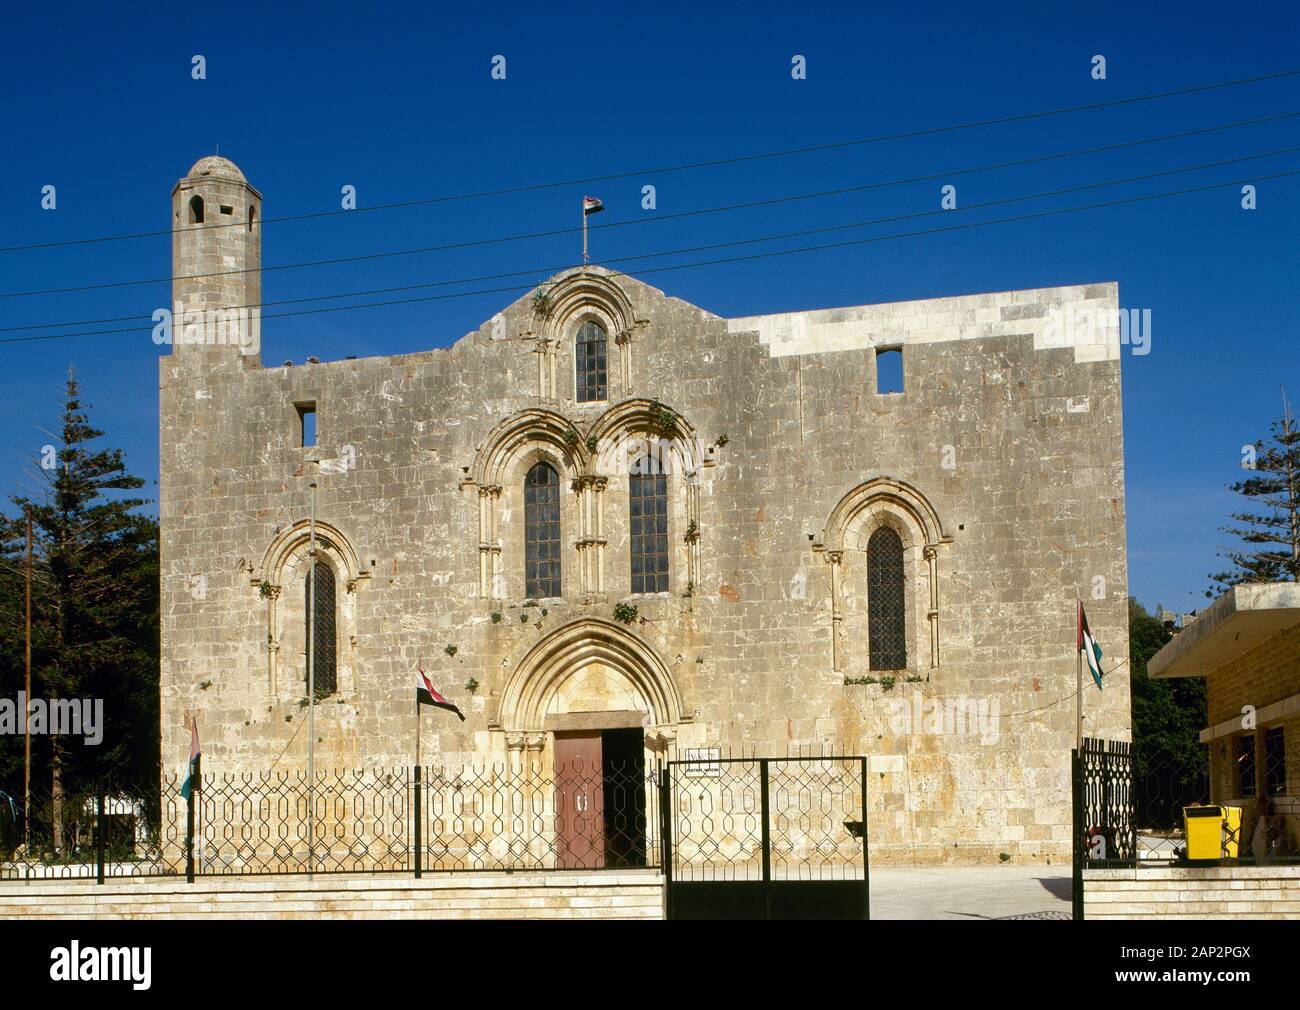 Syrian Arab Republic. Tartus. Cathedral of Our Lady of Tortosa. It was built by the crusaders during the 12th century, in Romanesque and early Gothic style. The Crusader era. Facade. Photo taken before the Syrian CIvil War. Stock Photo